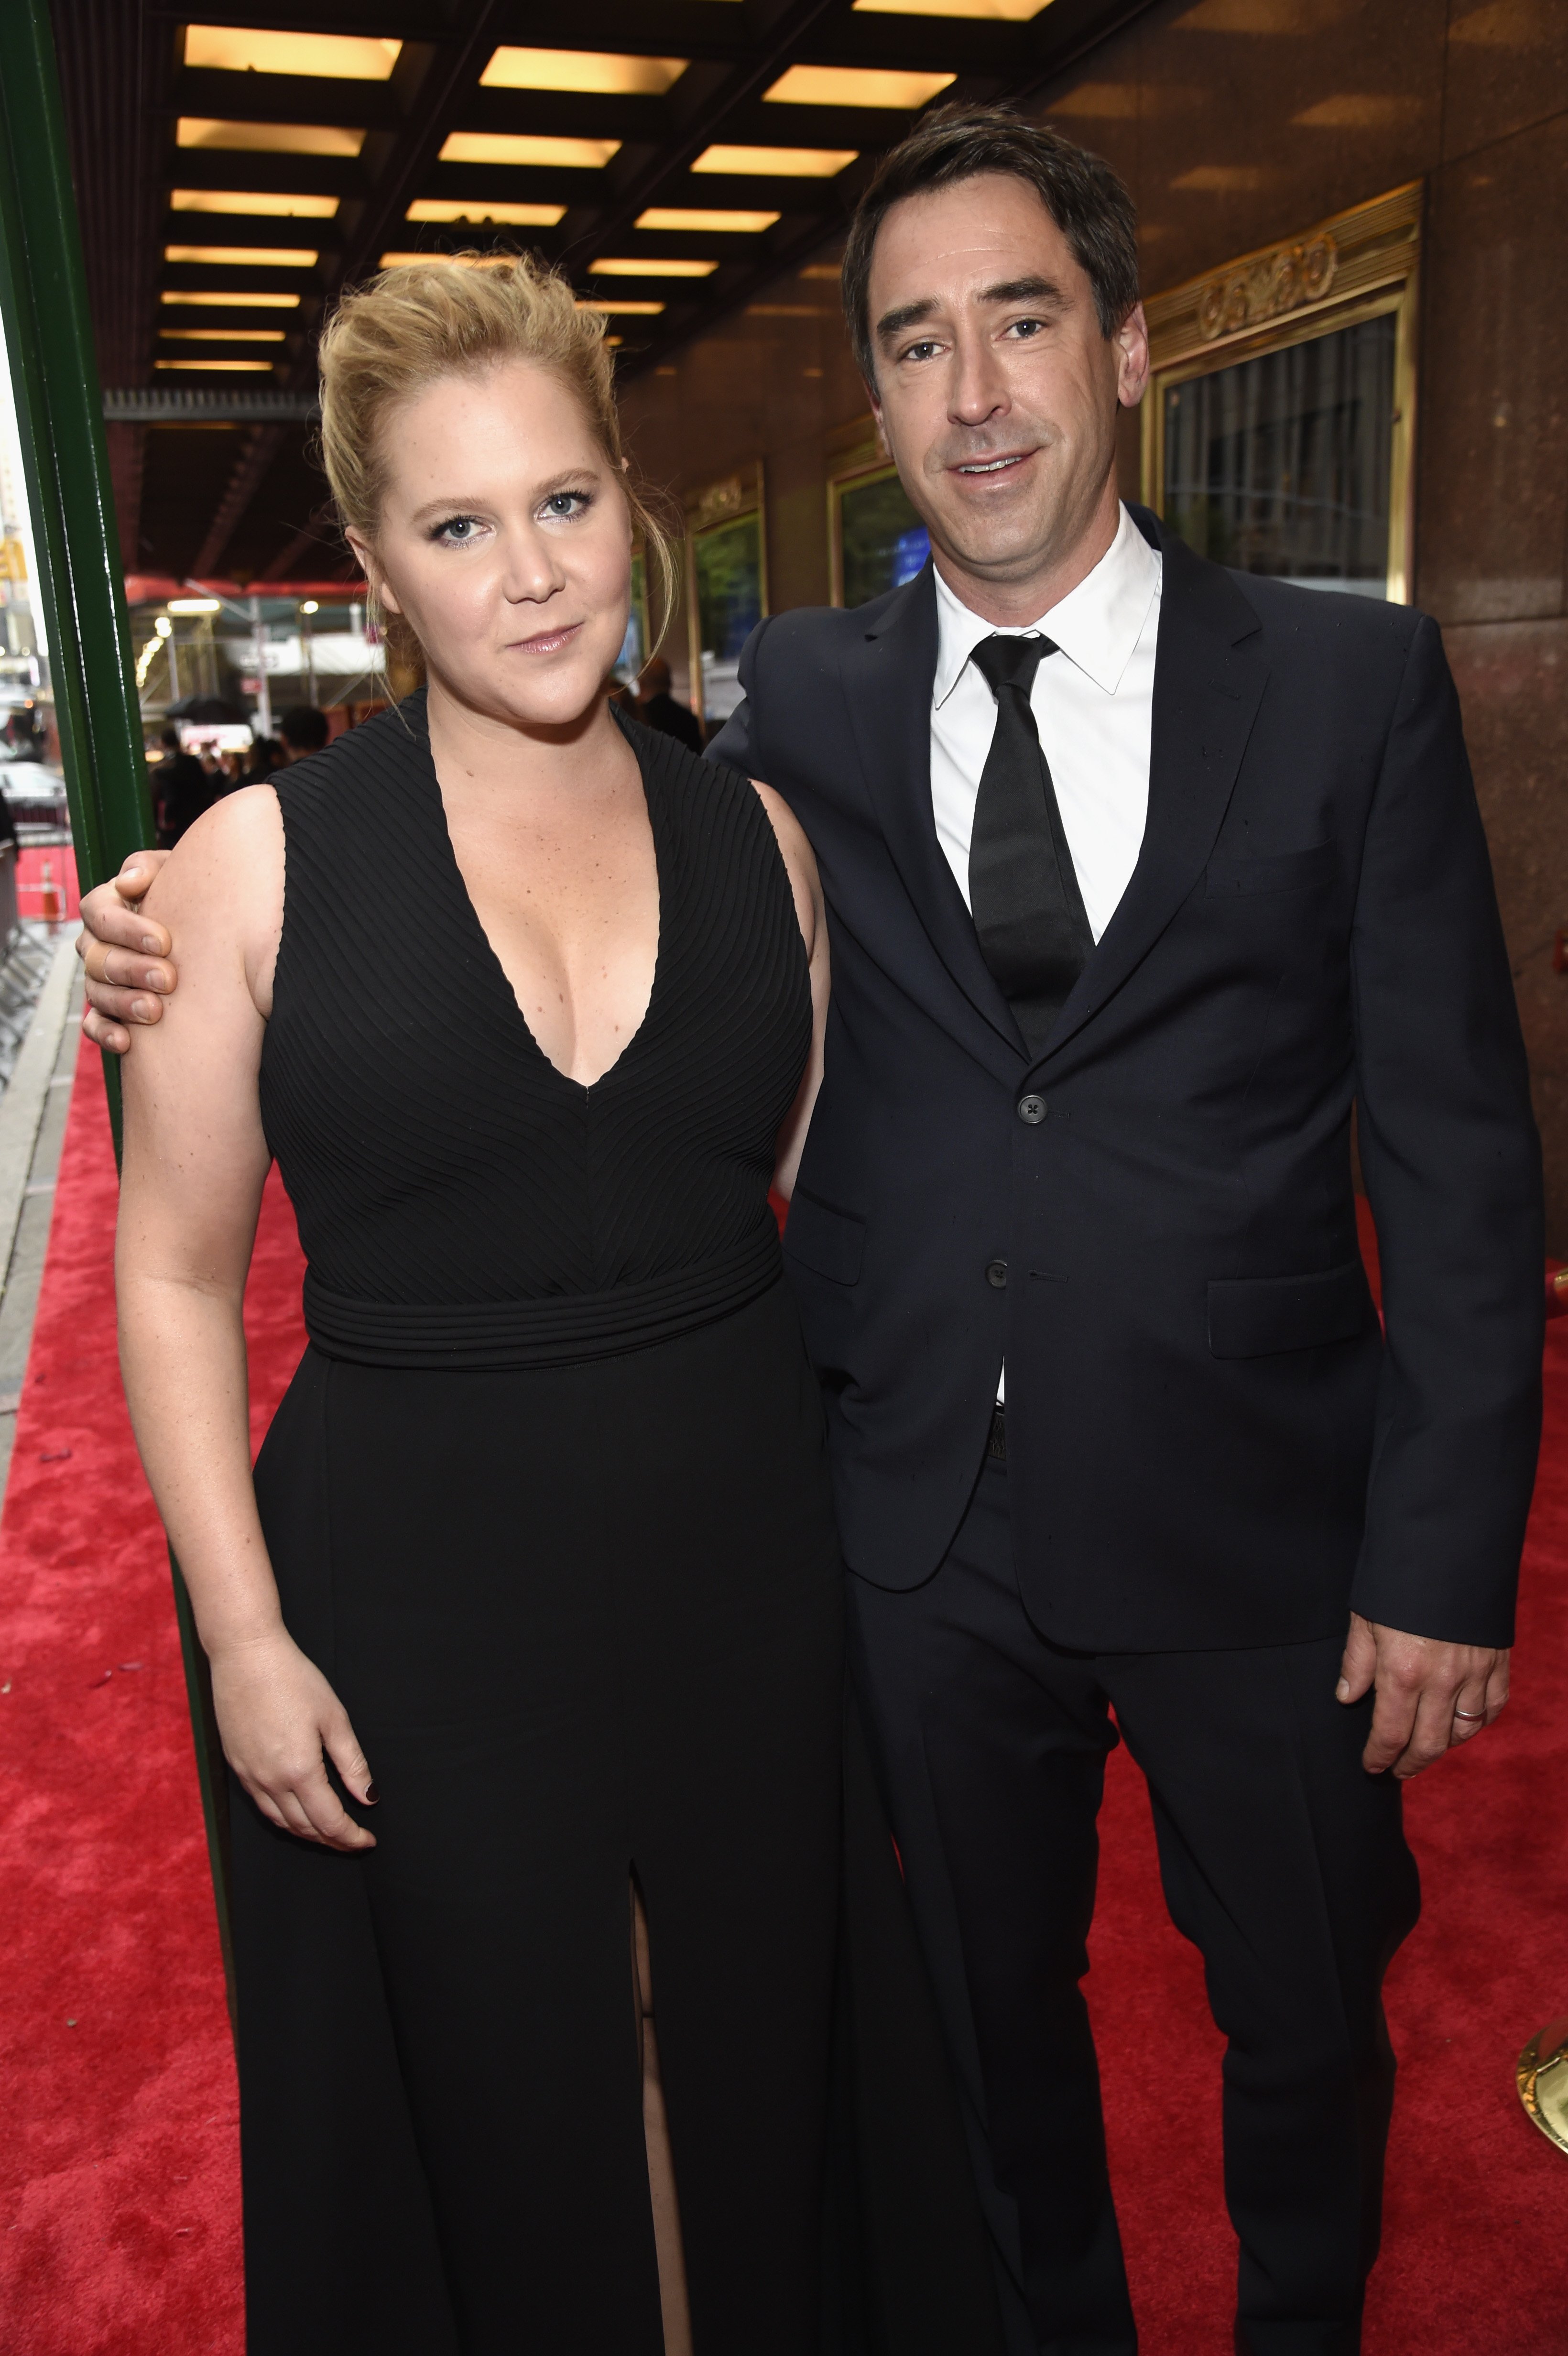 Amy Schumer and Chris Fischer attend the 72nd Annual Tony Awards on June 10, 2018, in New York City. | Source: Getty Images.